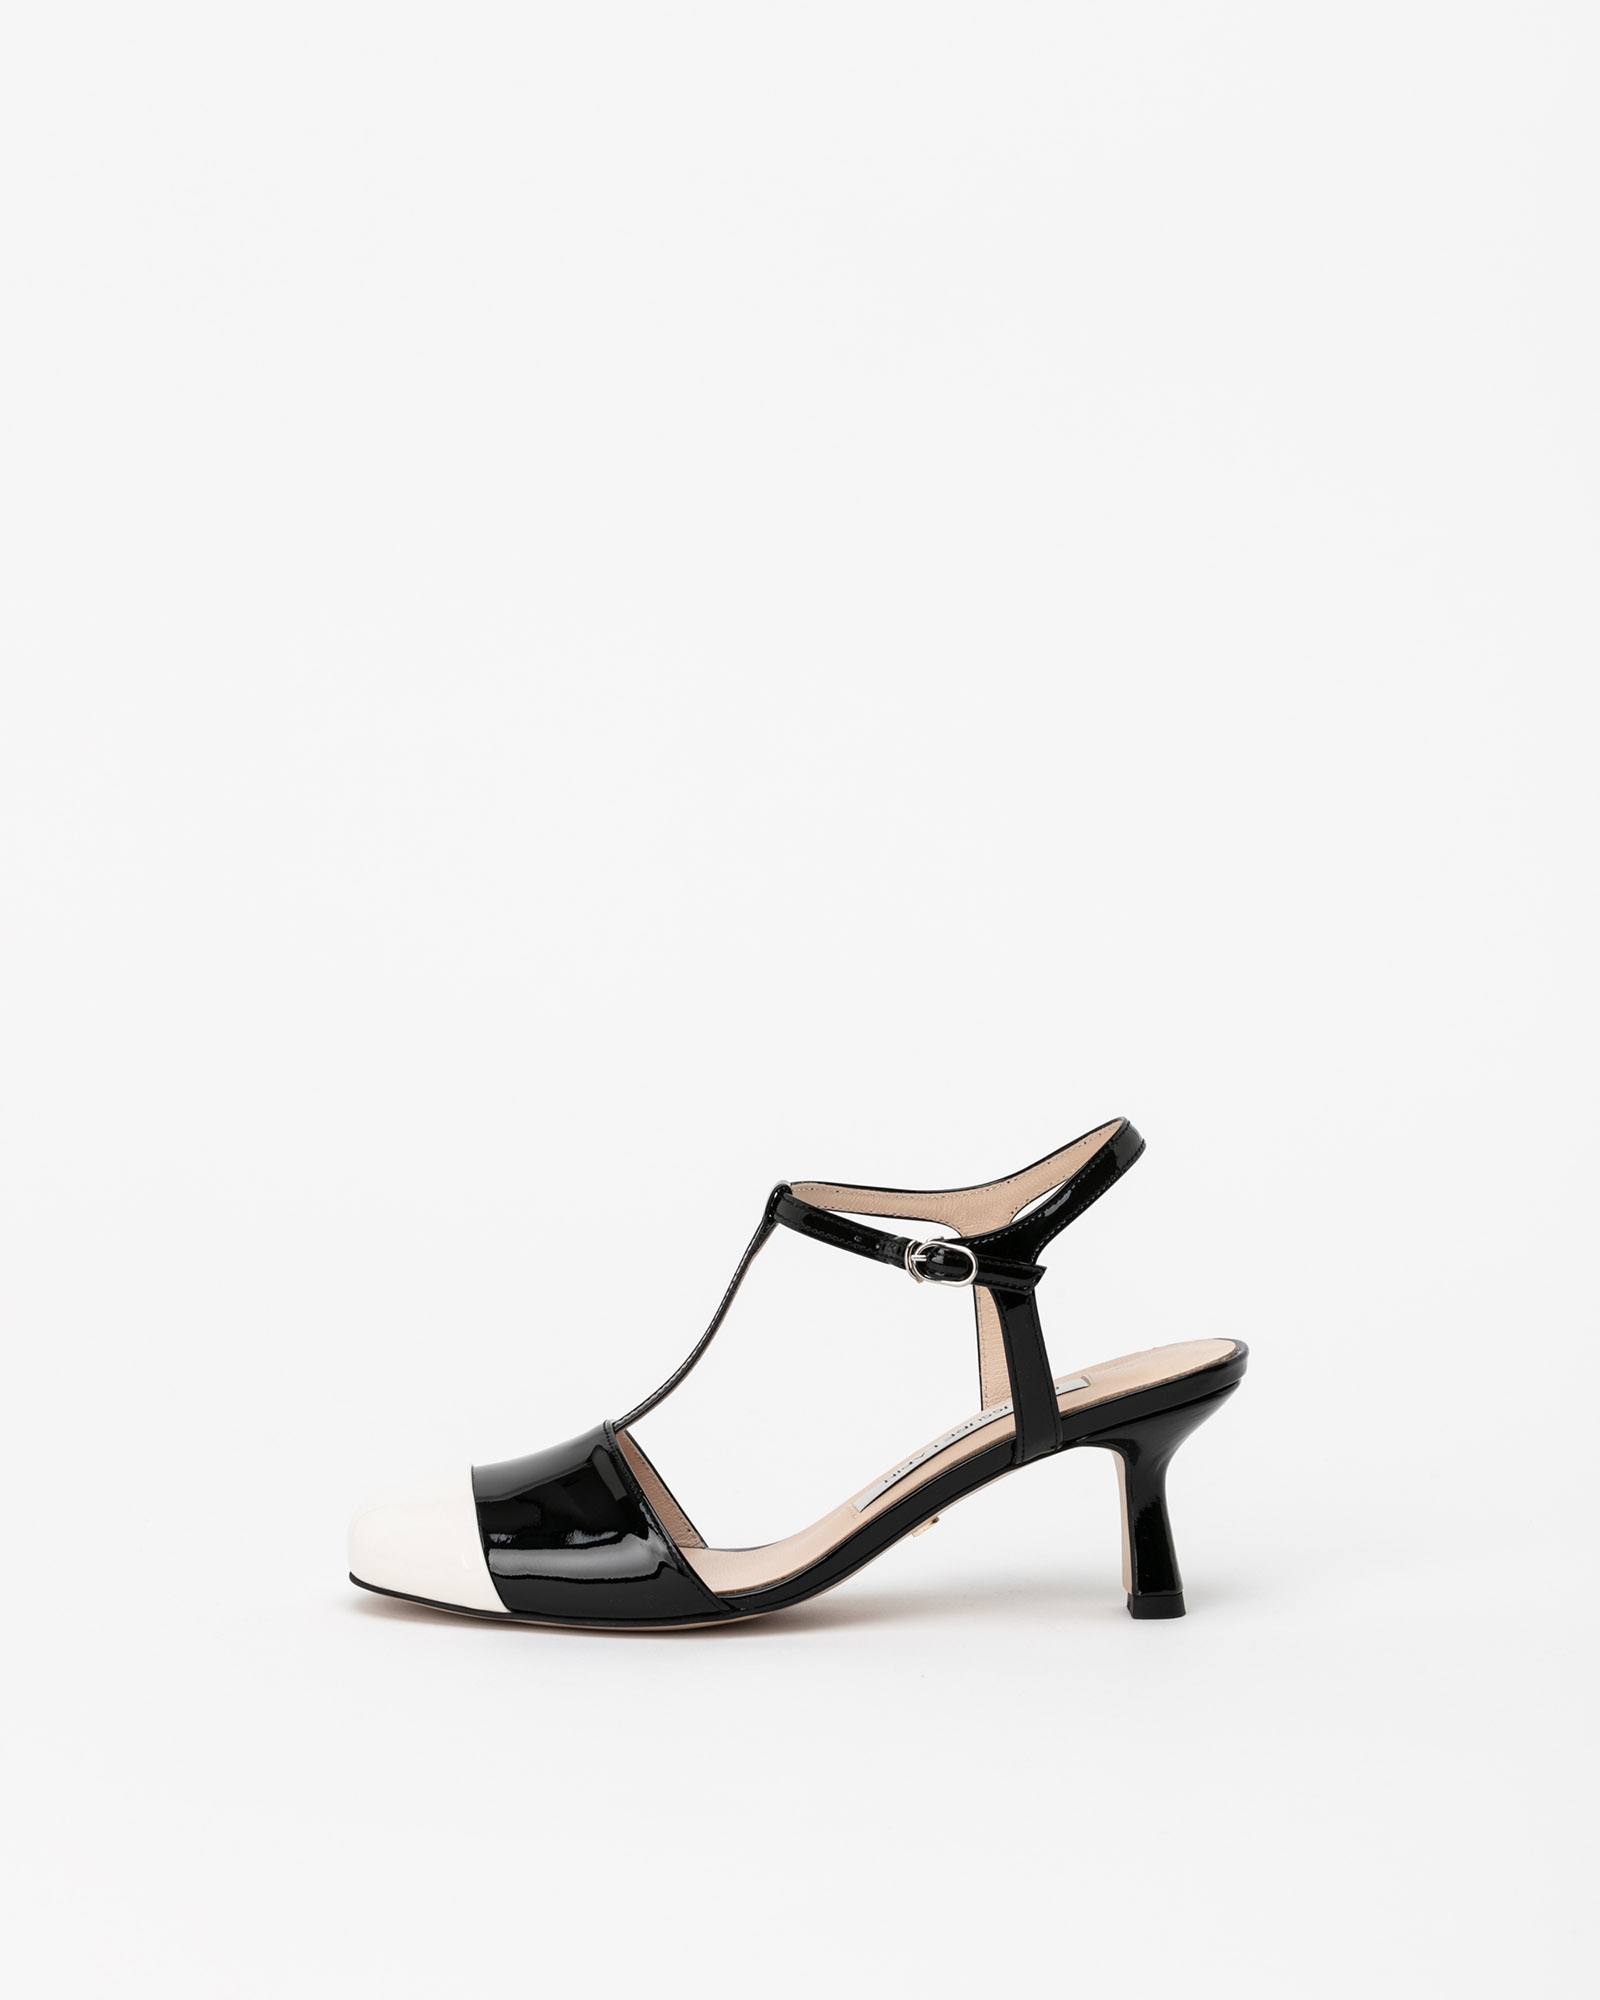 Parrozzo Strap Pumps in Black Patent with Milky White Patent